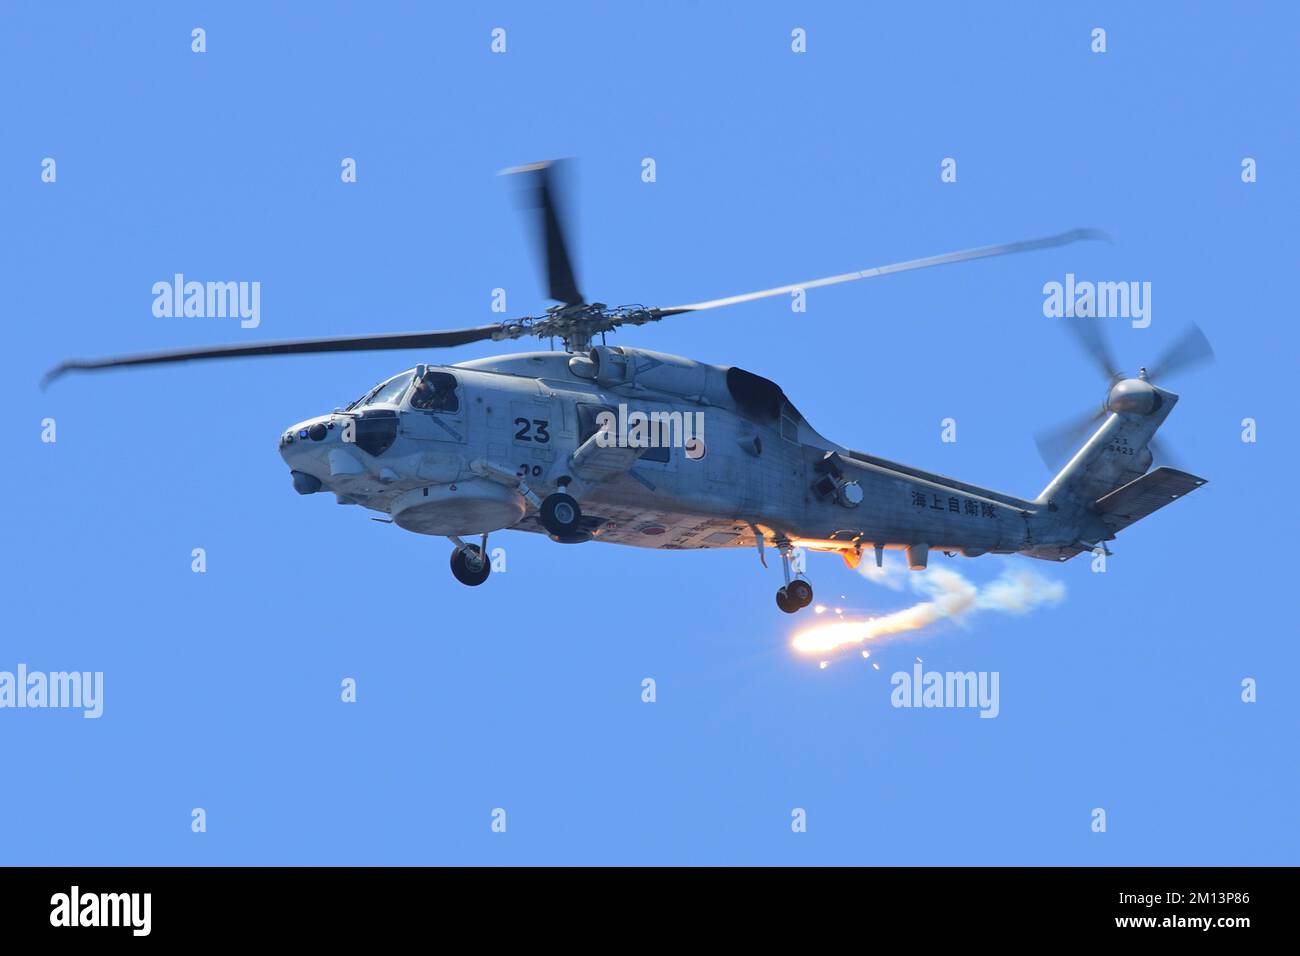 Kyoto Prefecture, Japan - July 25, 2014: Japan Maritime Self-Defense Force Sikorsky SH-60K Seahawk anti-submarine helicopter deploying IR flare. Stock Photo